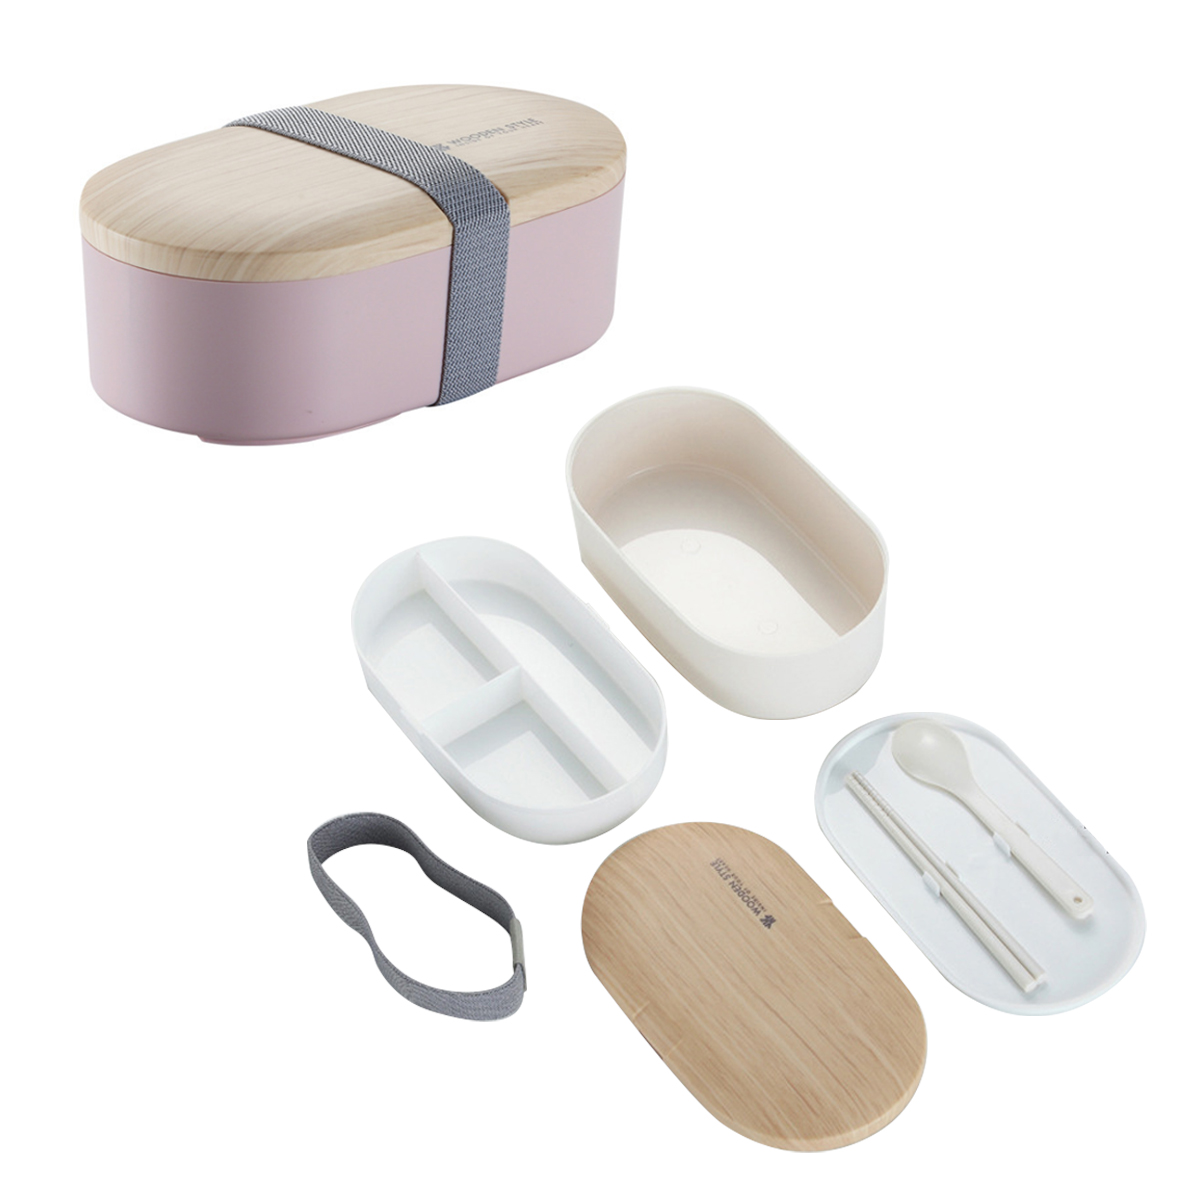 Japanese Oval Bento Lunch Box